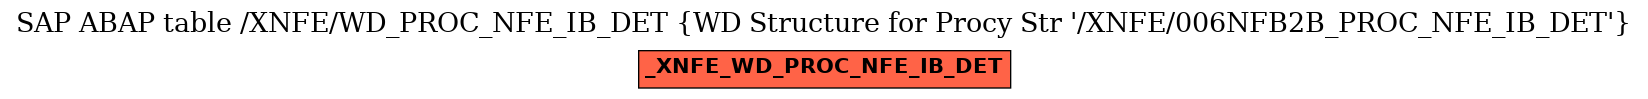 E-R Diagram for table /XNFE/WD_PROC_NFE_IB_DET (WD Structure for Procy Str 